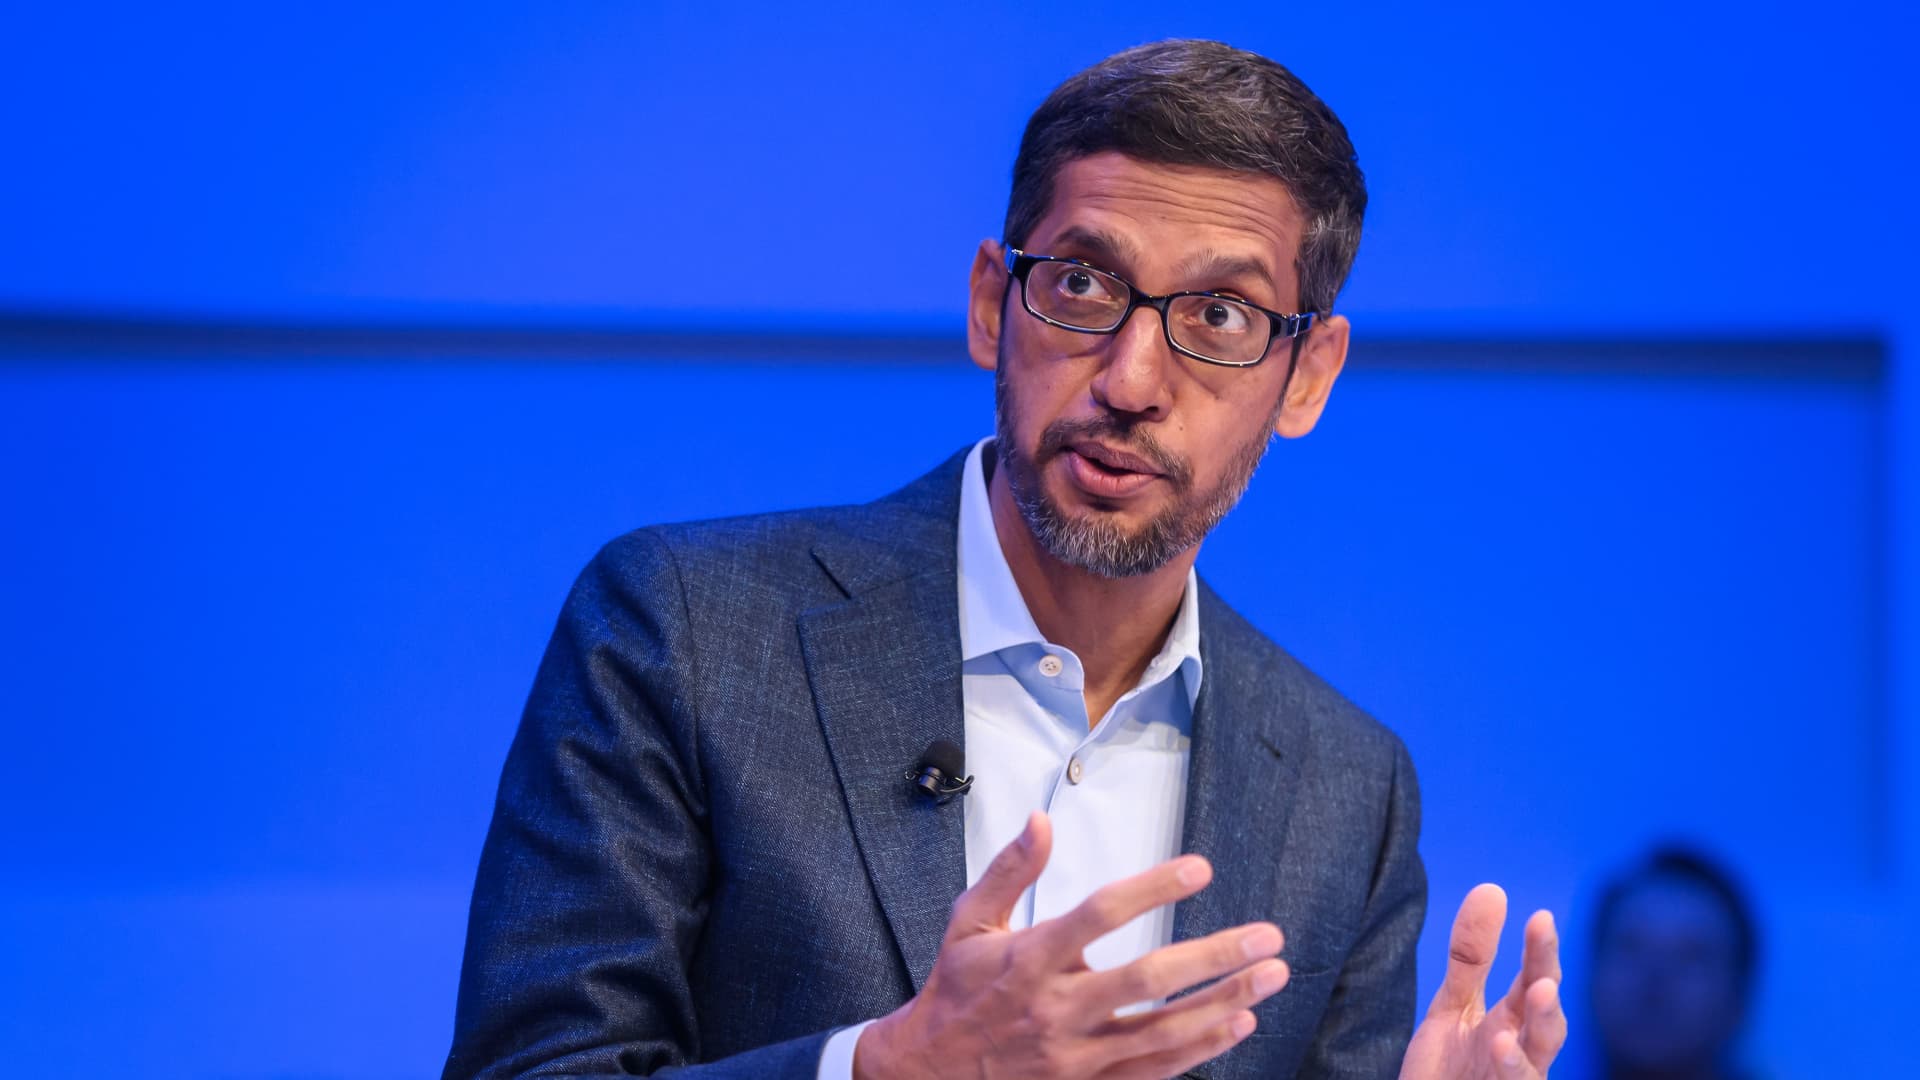 Google CEO promises new AI features are coming to search ‘very soon’ amid competition from ChatGPT